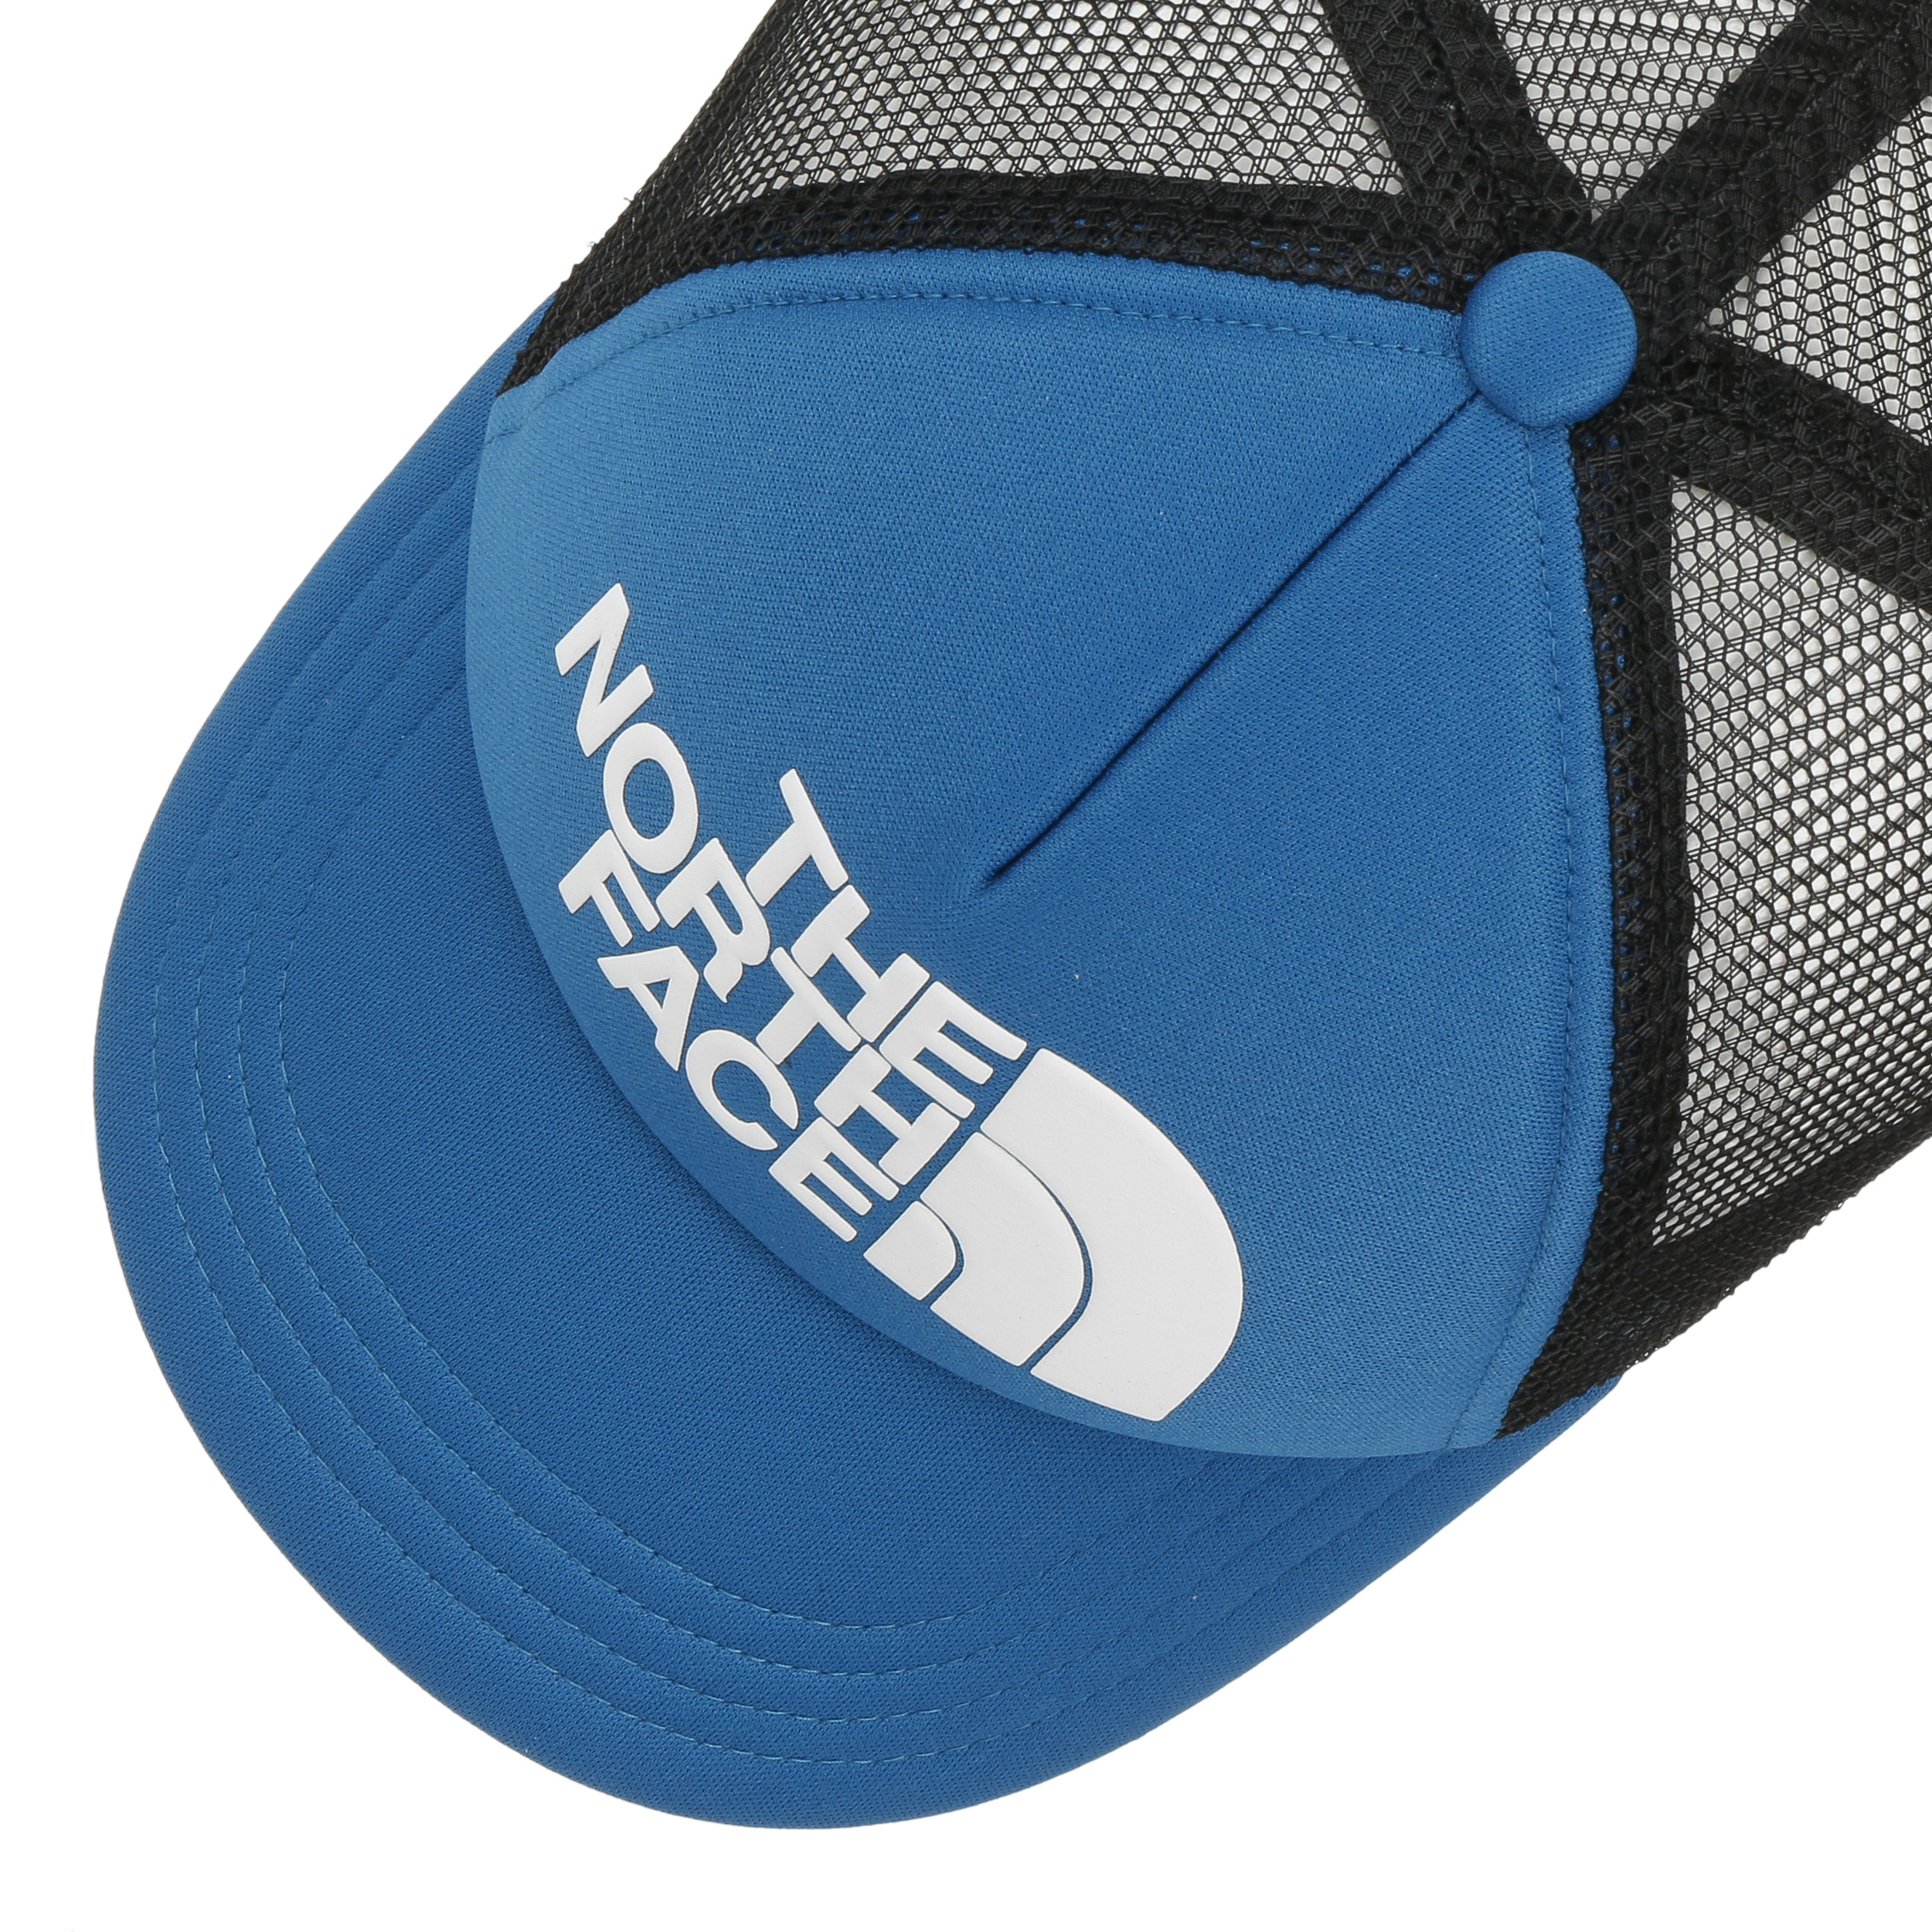 The North Face Youth Logo Trucker - Casquette Enfants